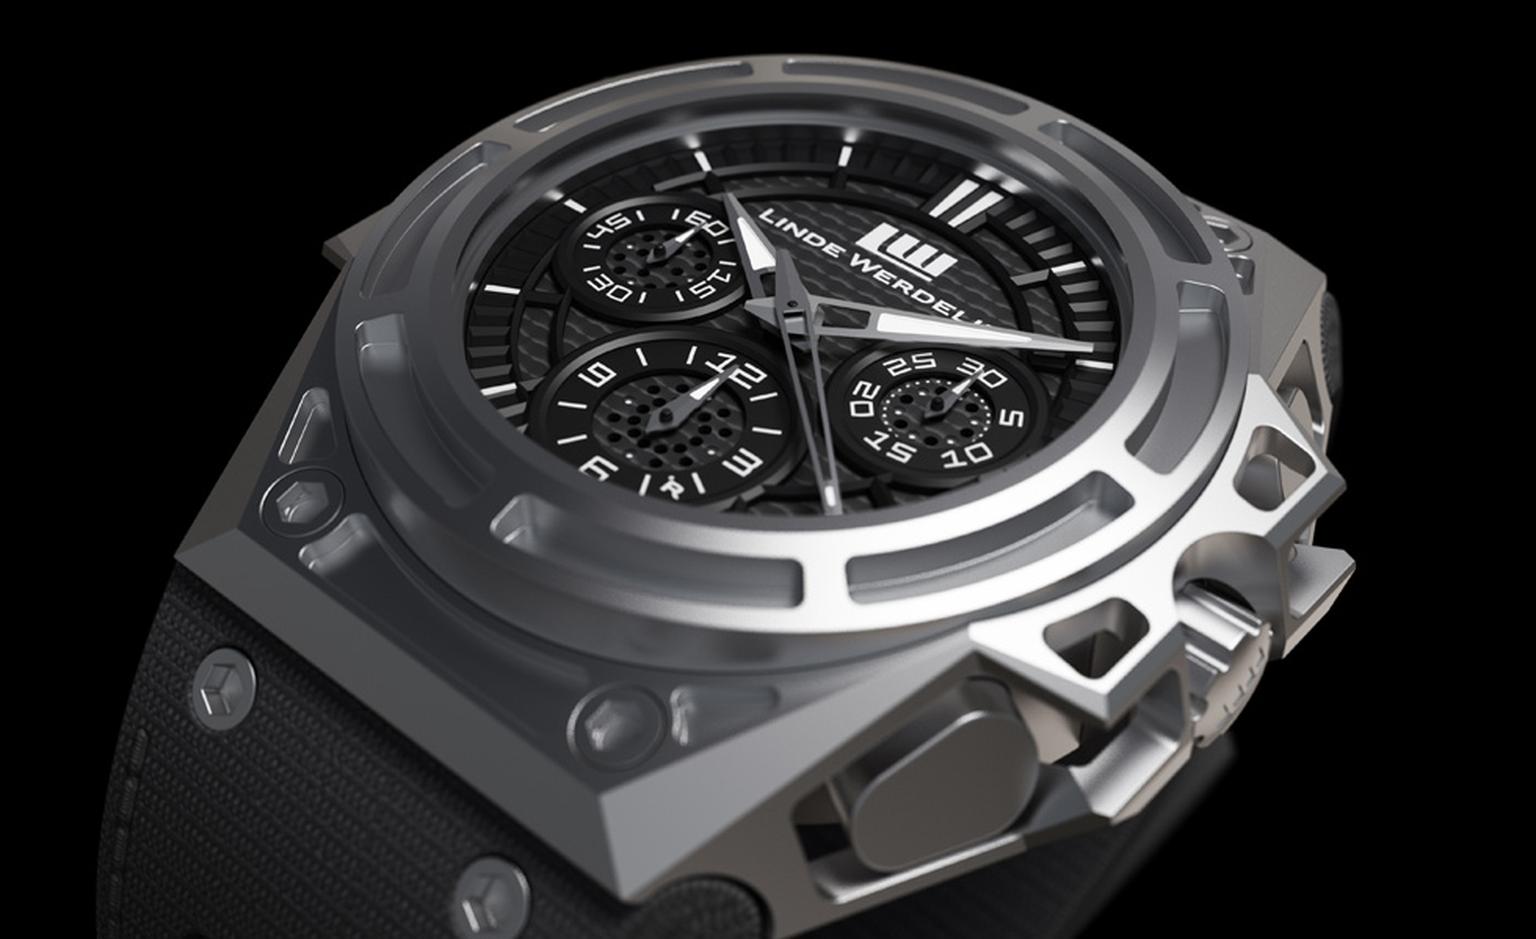 Linde Werdelin's SpidoSpeed has a skeletonised case that despite its unusual structure is resilient and also very light. This watch, like all Linde Werdelin models, is designed to receive a computer module that clips on top to monitor conditions.